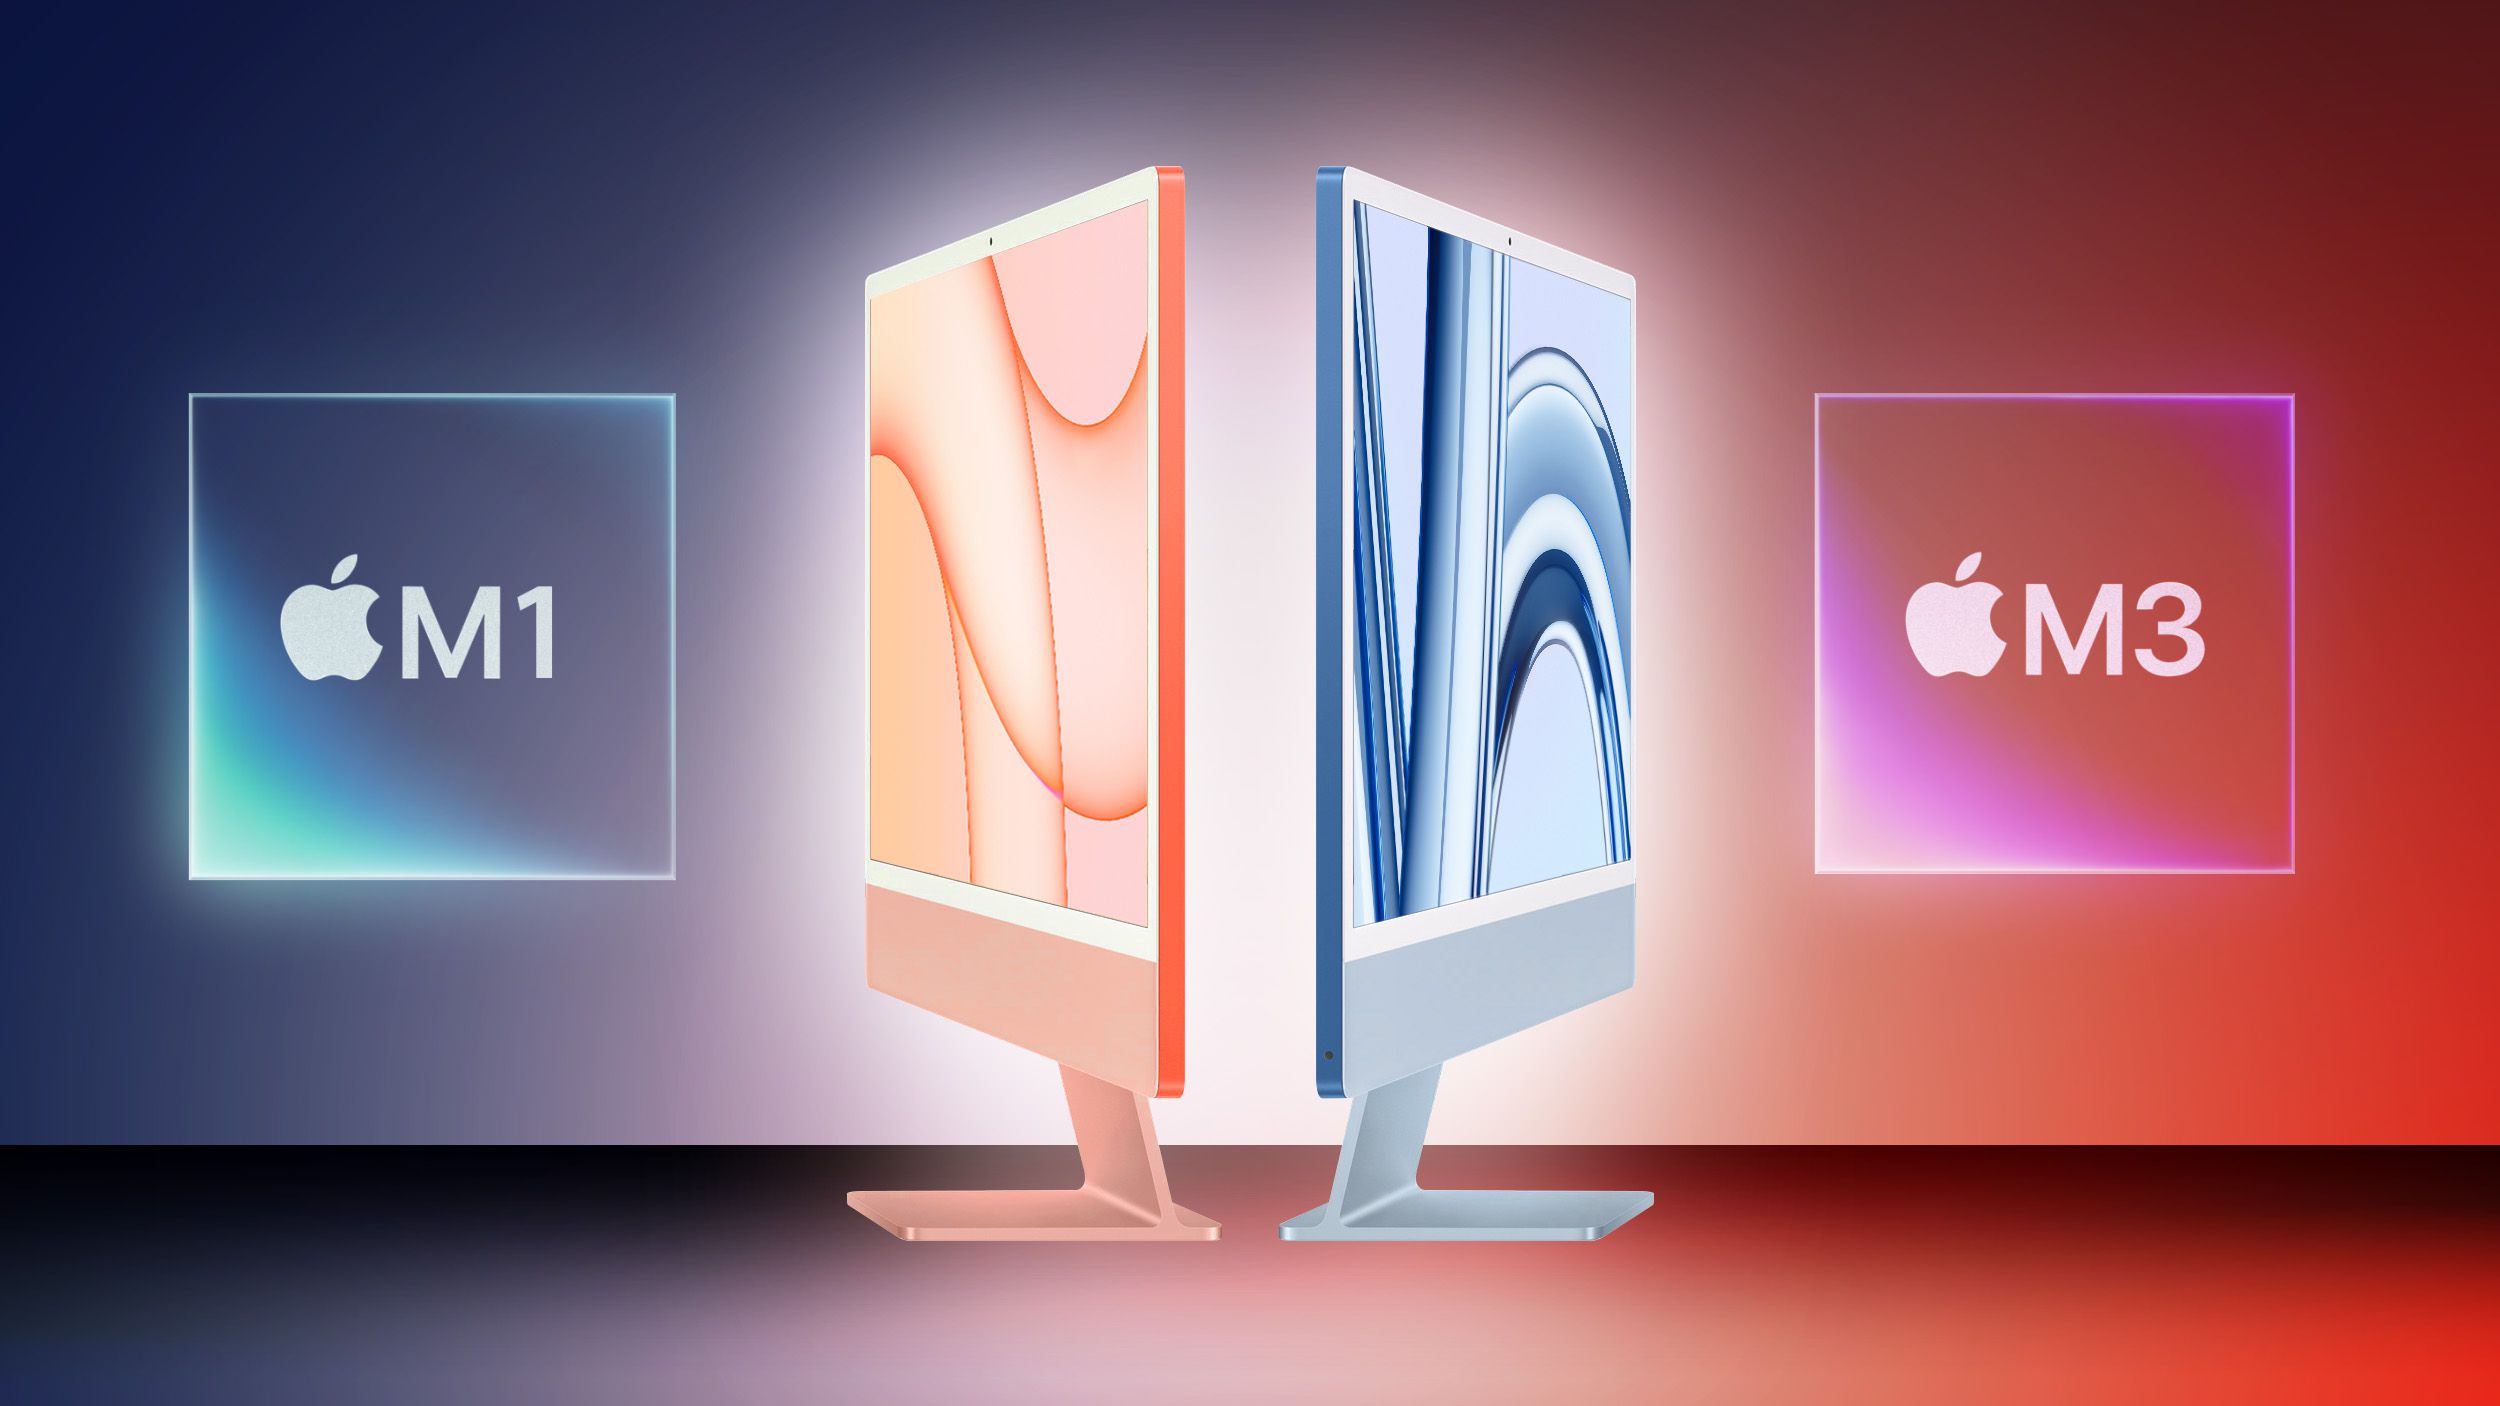 M3 iMac vs. M1: What are the differences?